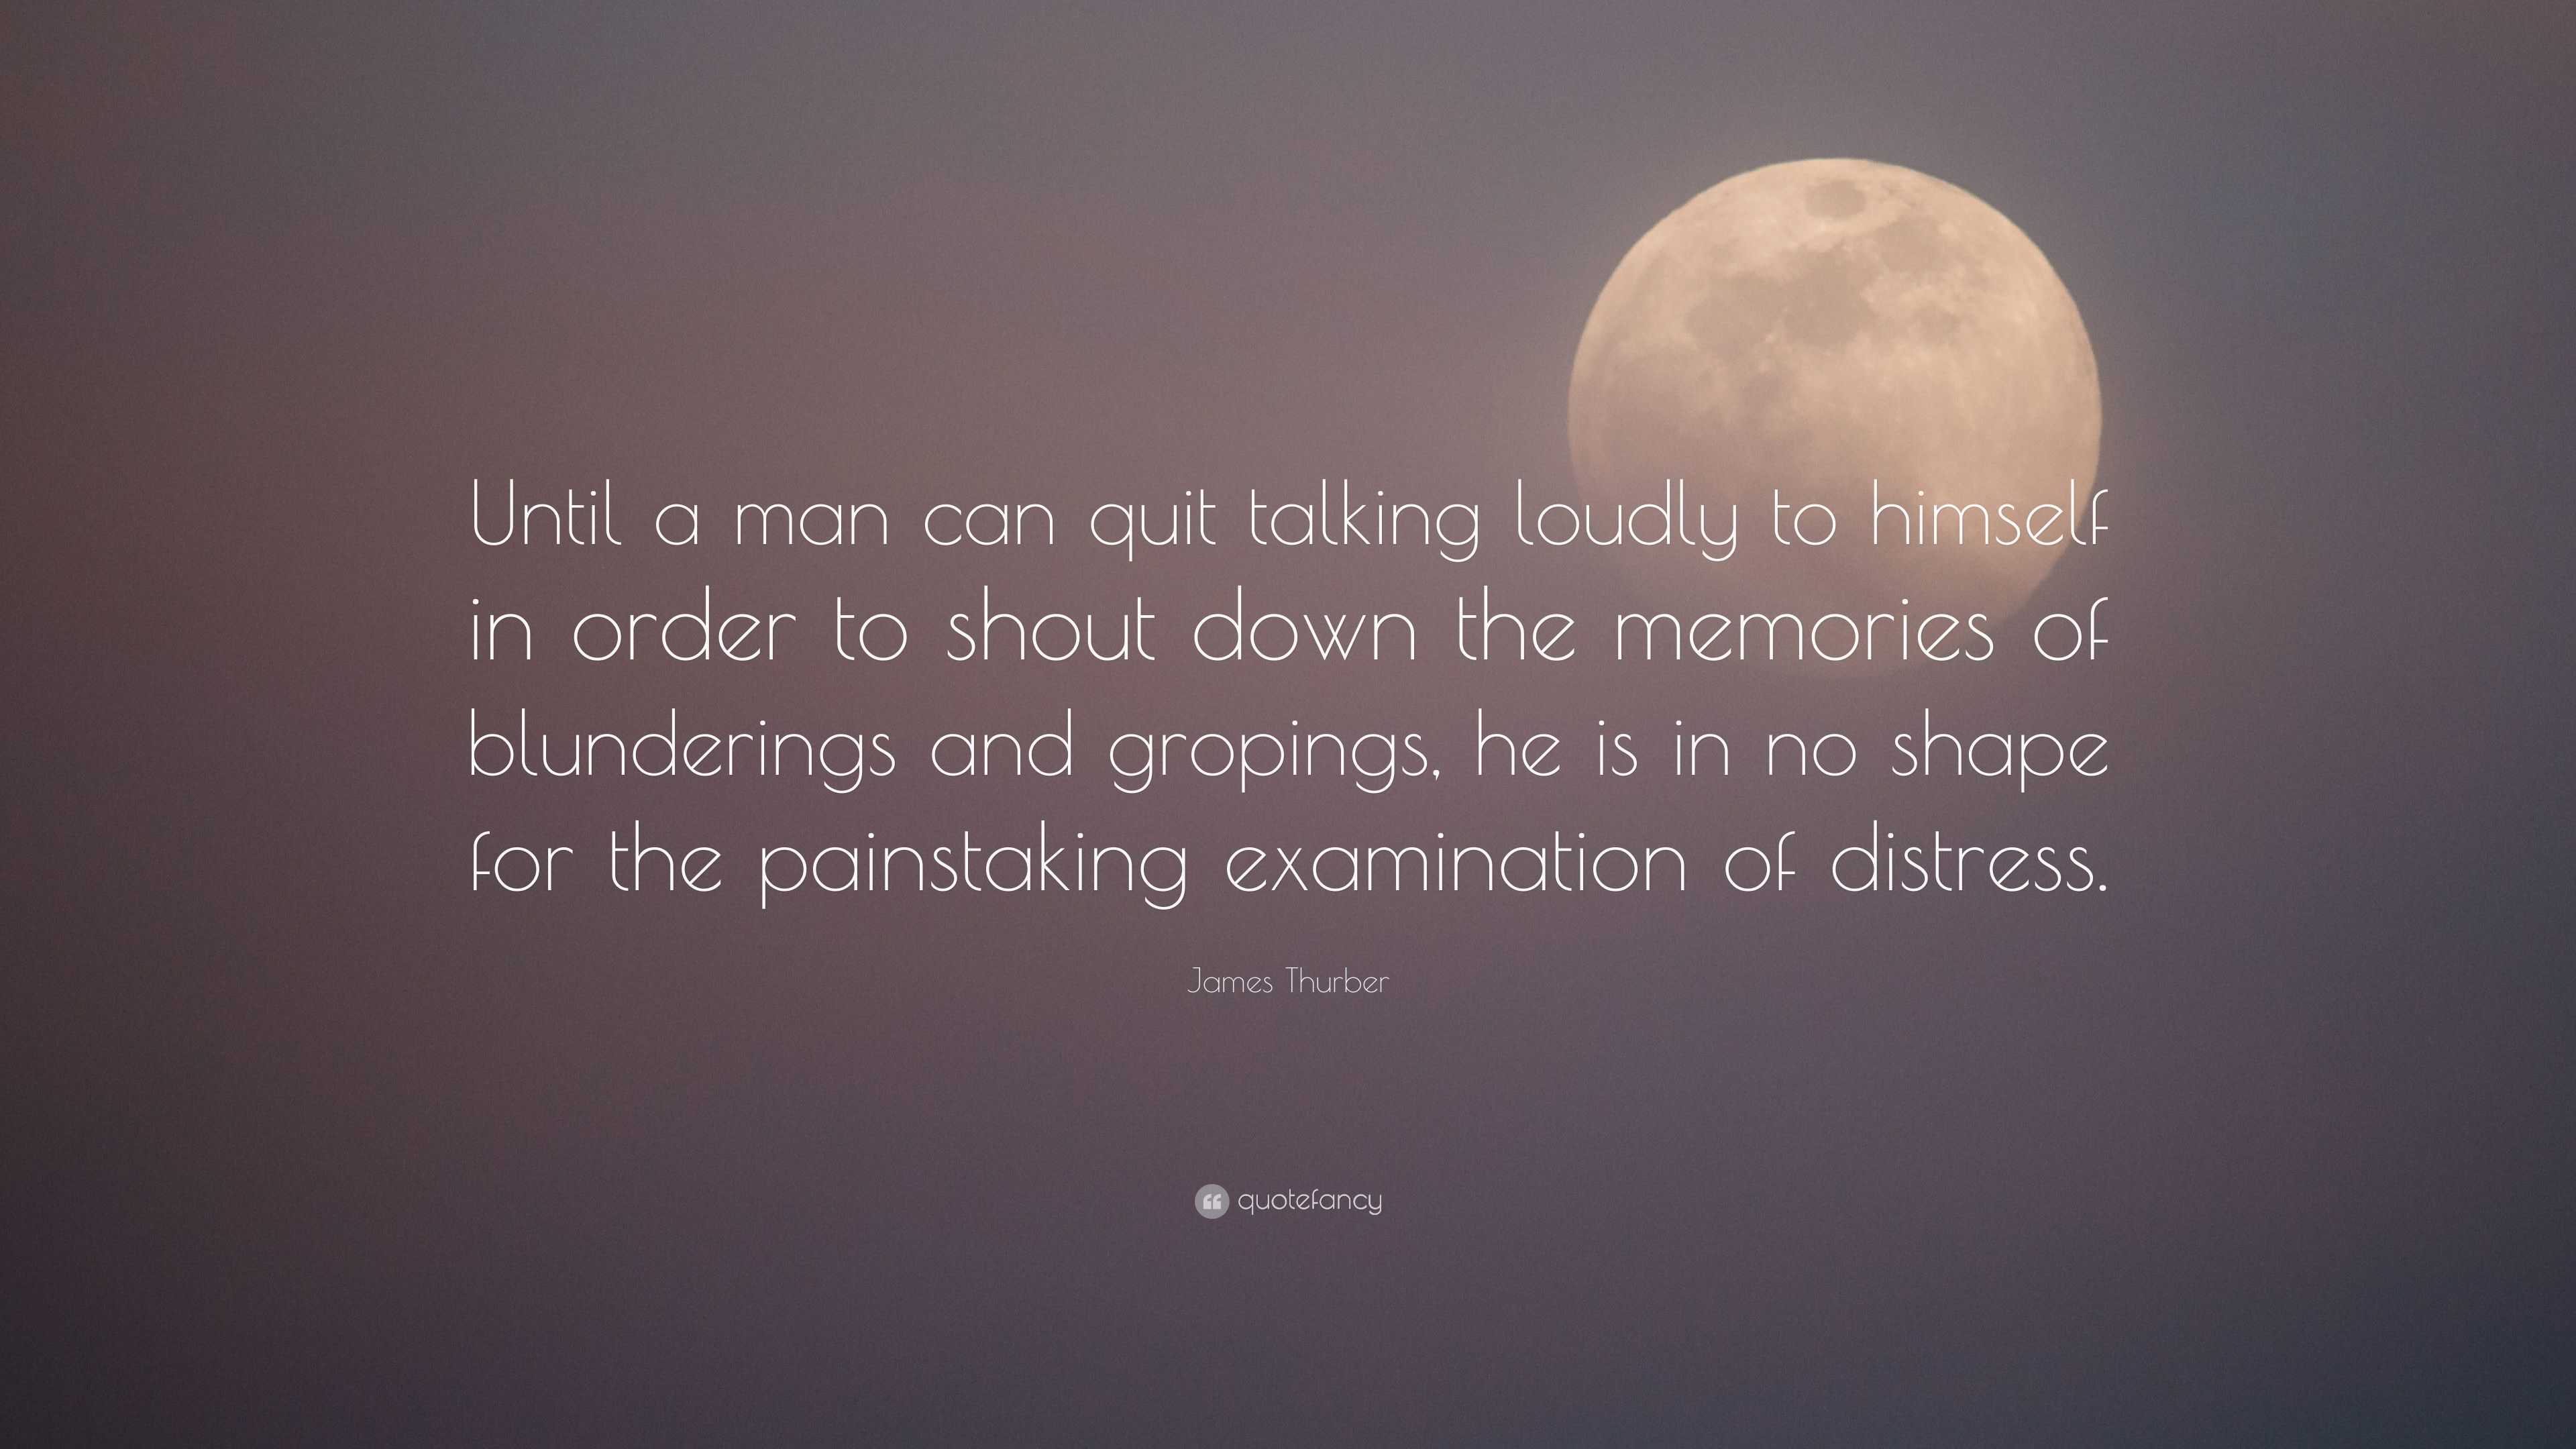 James Thurber Quote: “Until a man can quit talking loudly to himself in ...